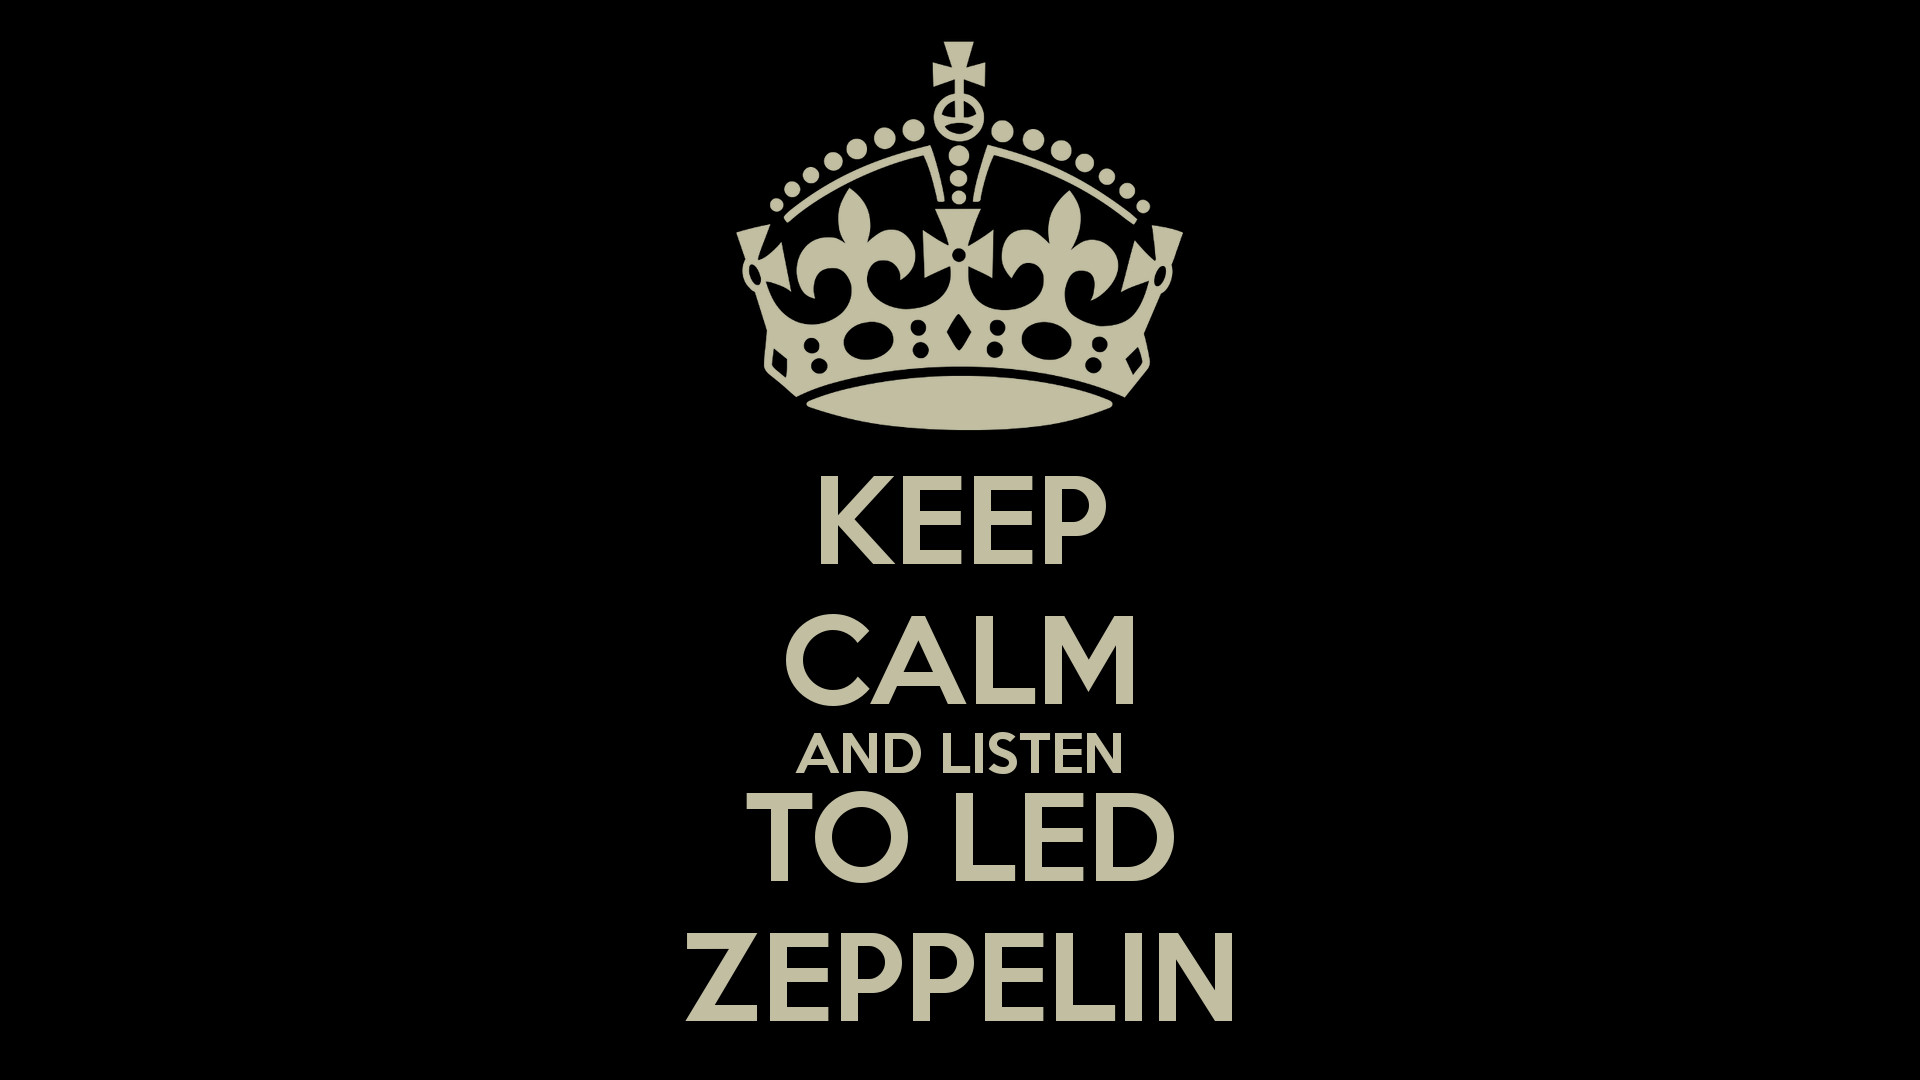 Download Free Led Zeppelin IPhone Wallpapers 1920×1080